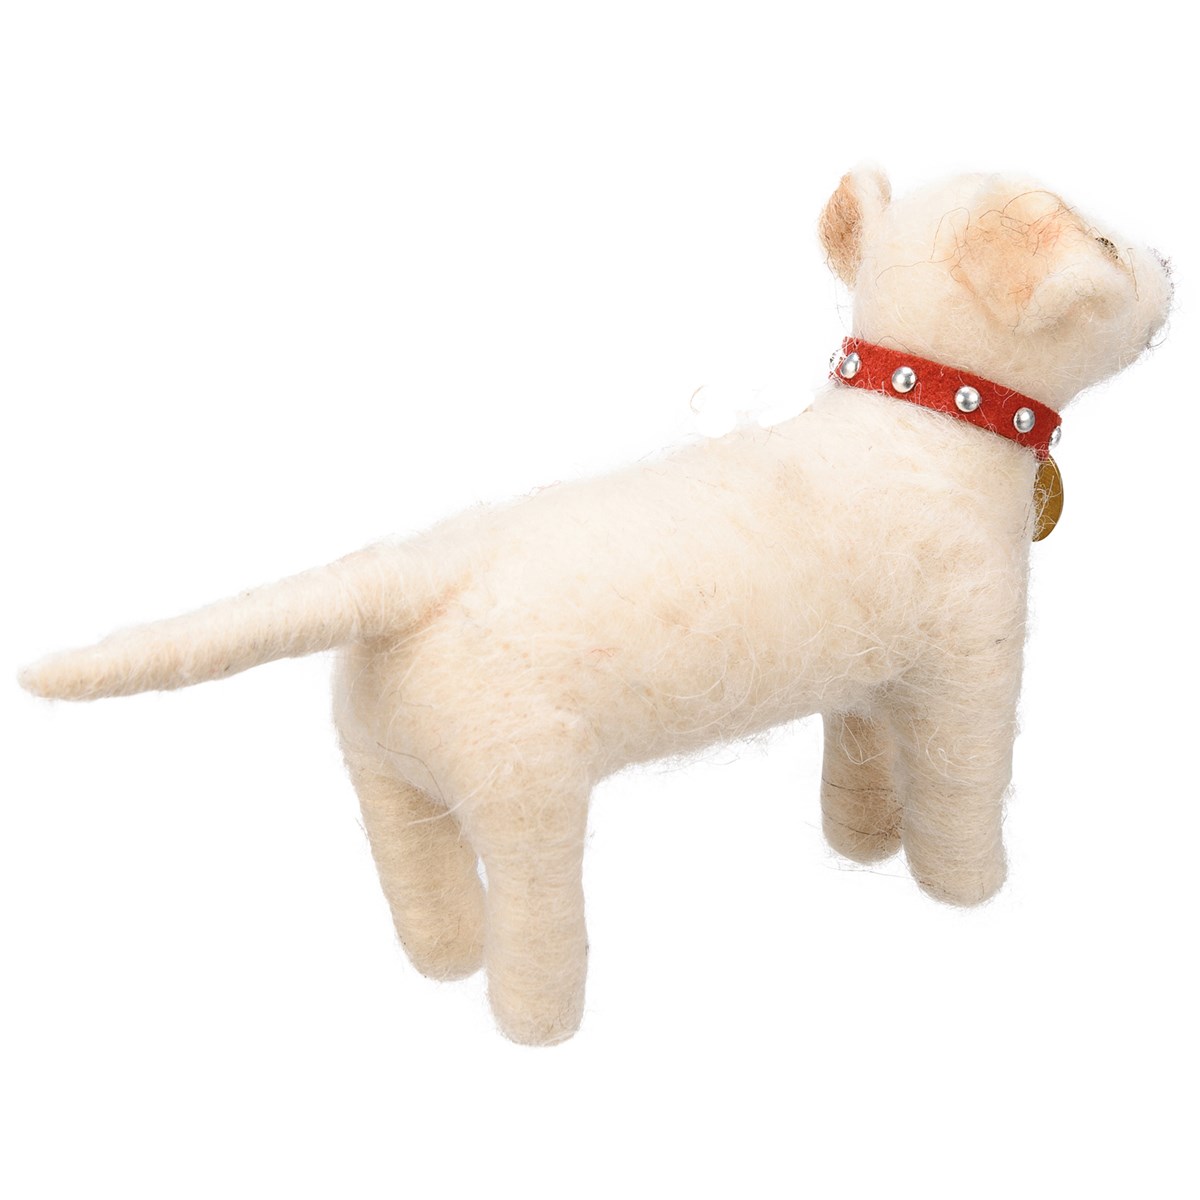 Lab Pup With Collar Critter - Felt, Polyester, Plastic